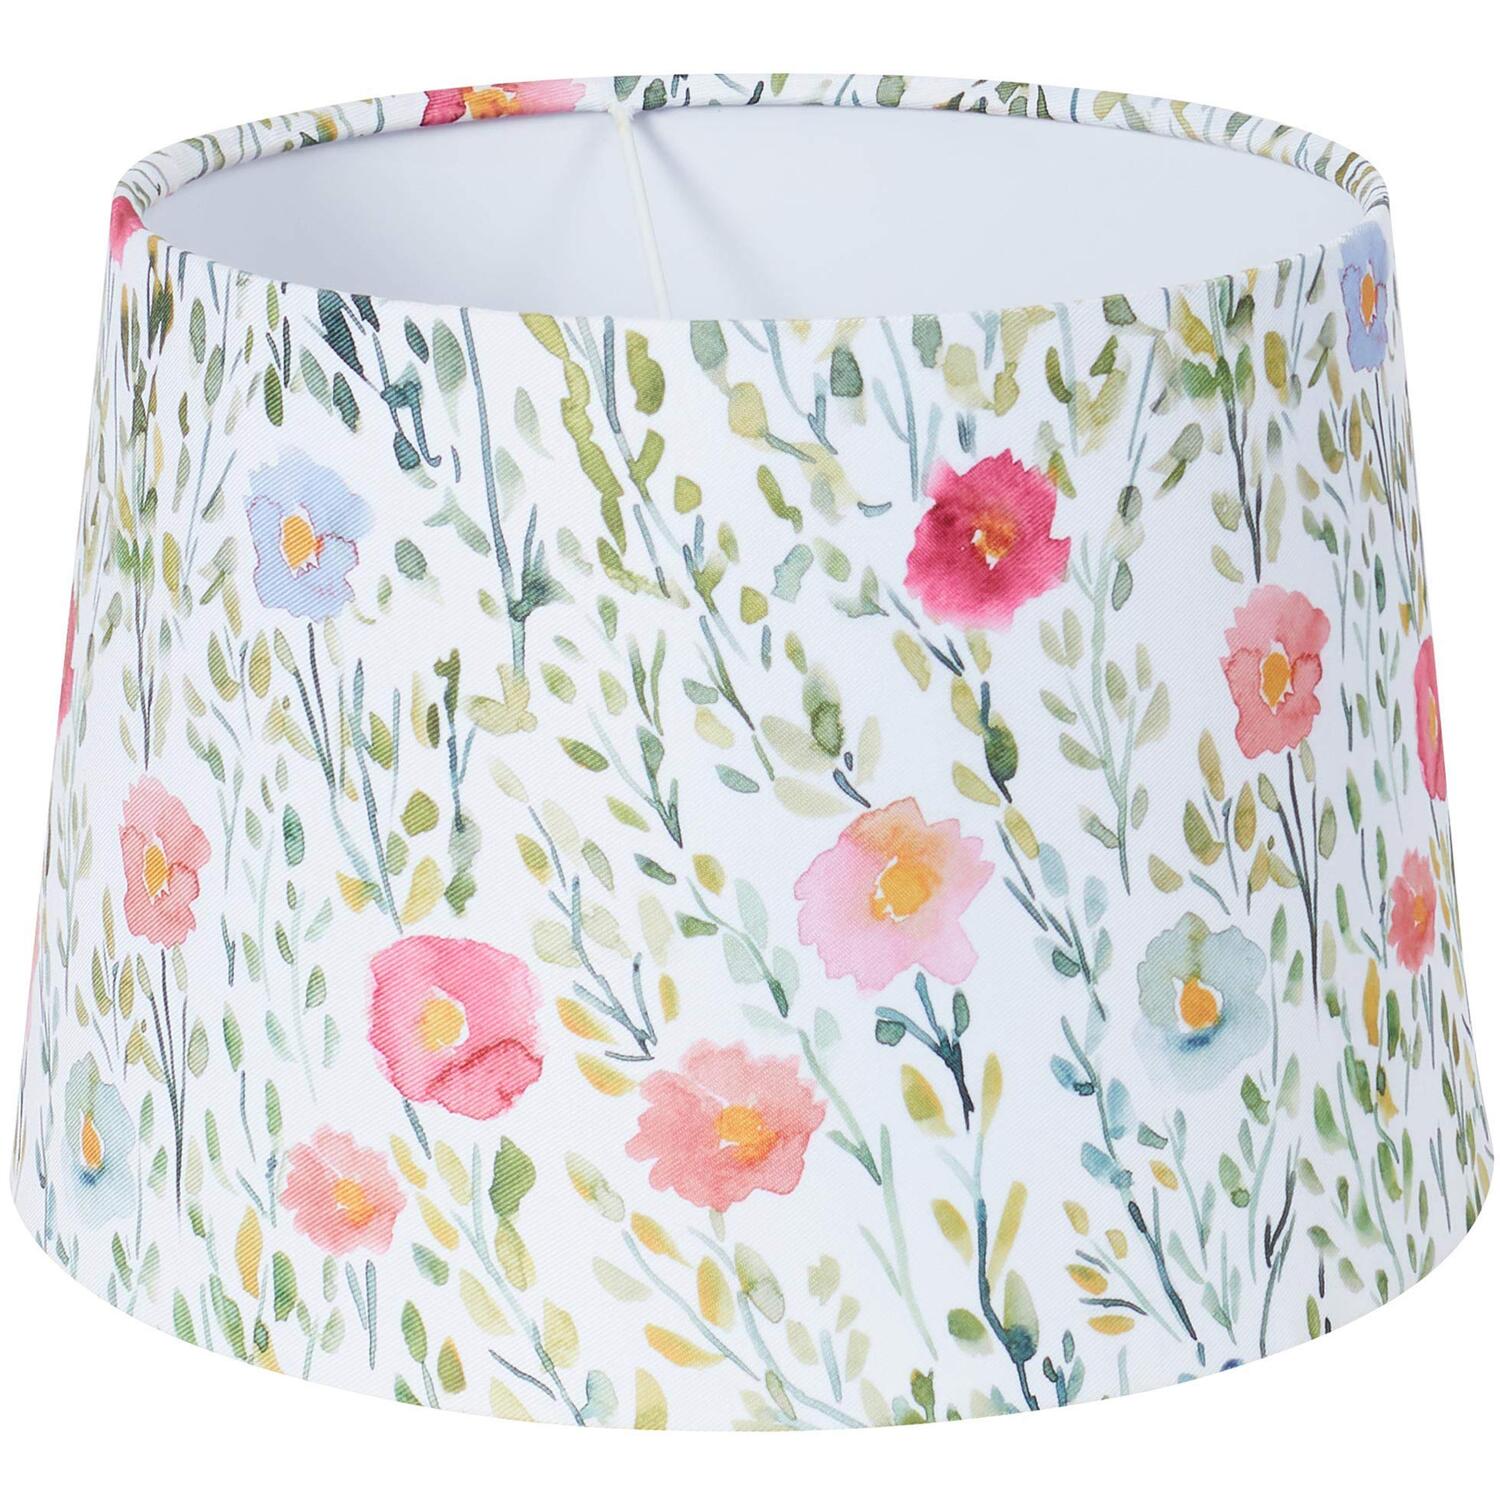 Pastel Floral Tapered Shade - White Image 2